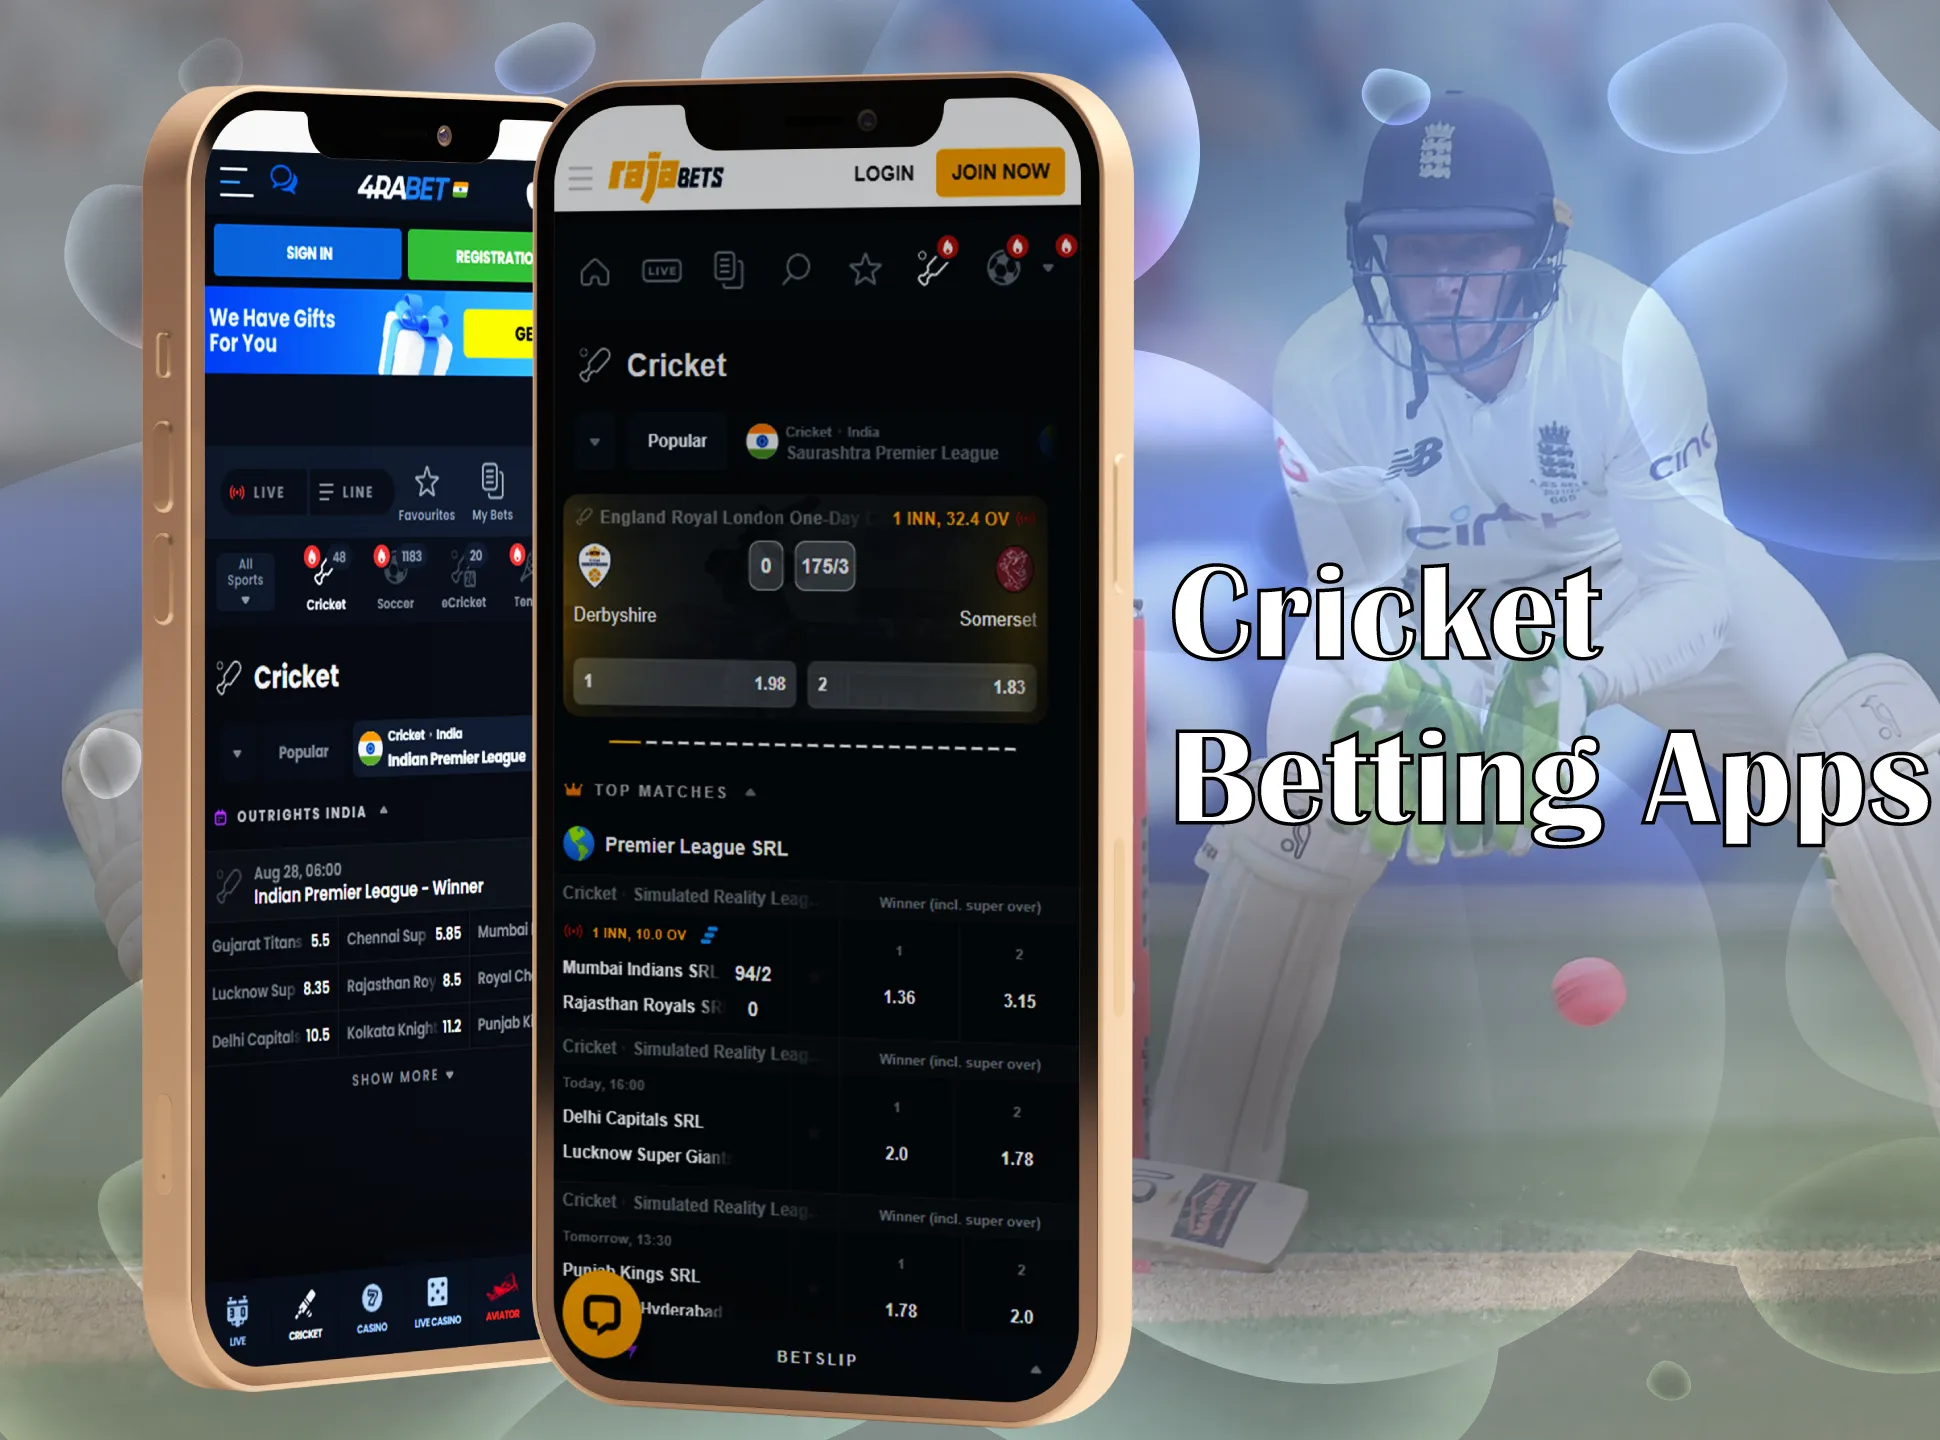 Install app of your favourite betting company on your device.